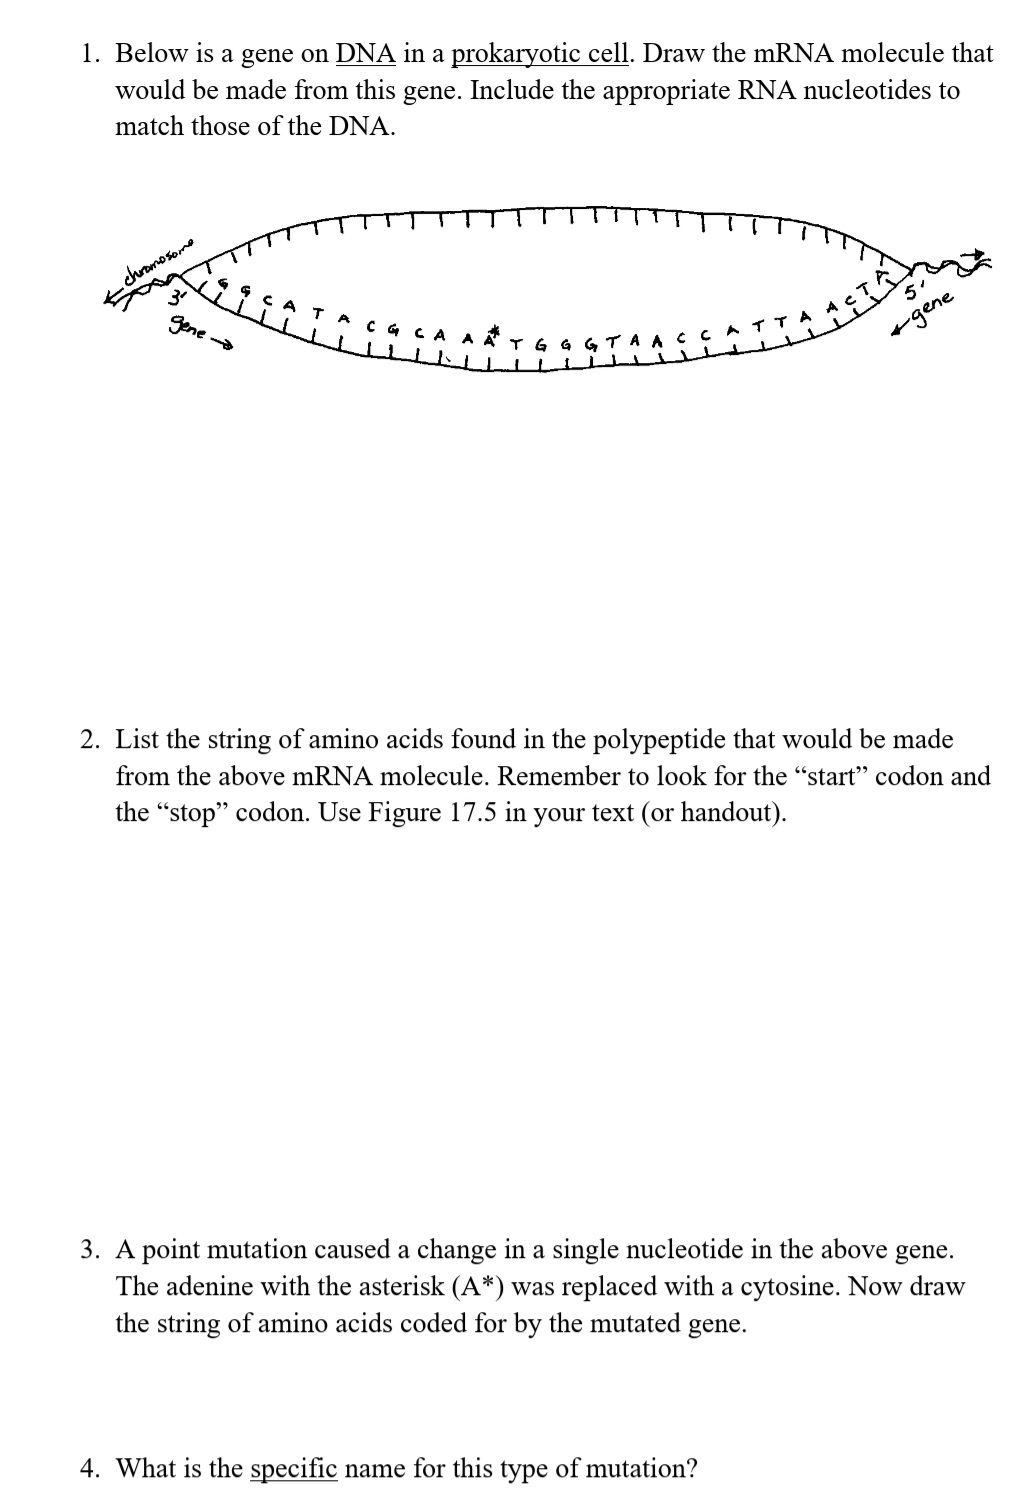 1. Below is a gene on DNA in a prokaryotic cell. Draw the mRNA molecule that
would be made from this gene. Include the appropriate RNA nucleotides to
match those of the DNA.
chromosomo
gene
TG G GT A A
+gene
2. List the string of amino acids found in the polypeptide that would be made
from the above mRNA molecule. Remember to look for the "start" codon and
the "stop" codon. Use Figure 17.5 in your text (or handout).
3. A point mutation caused a change in a single nucleotide in the above gene.
The adenine with the asterisk (A*) was replaced with a cytosine. Now draw
the string of amino acids coded for by the mutated
gene.
4. What is the specific name for this type of mutation?
